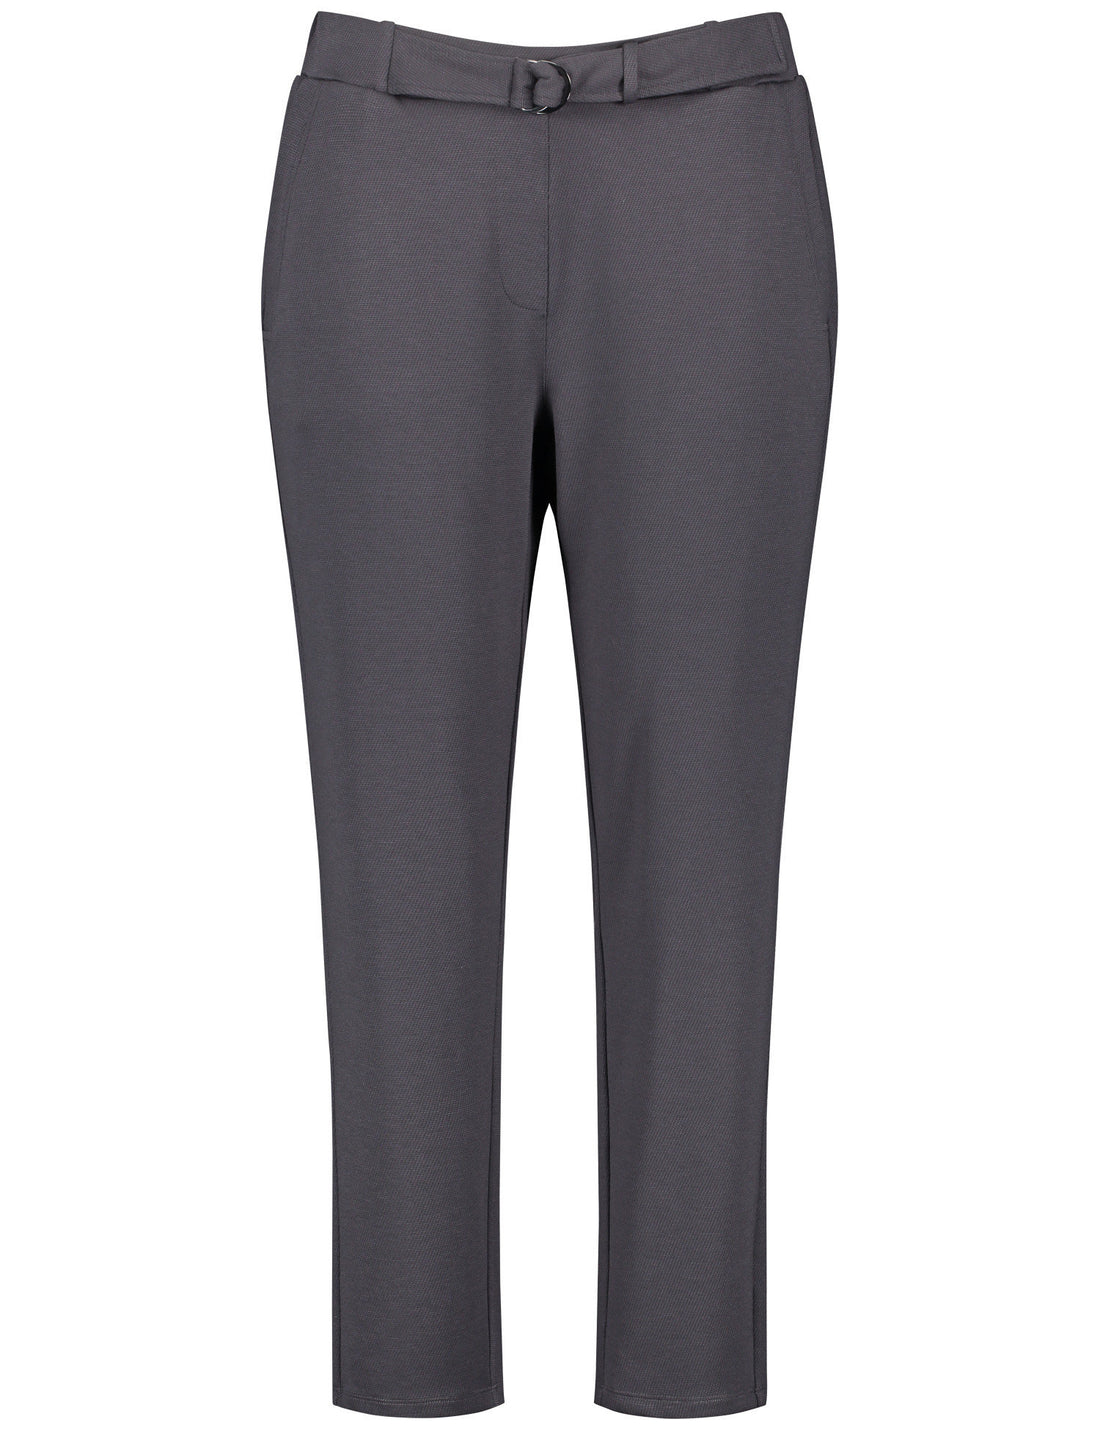 Tracksuit Bottoms With Added Stretch For Comfort_321205-26401_2220_02